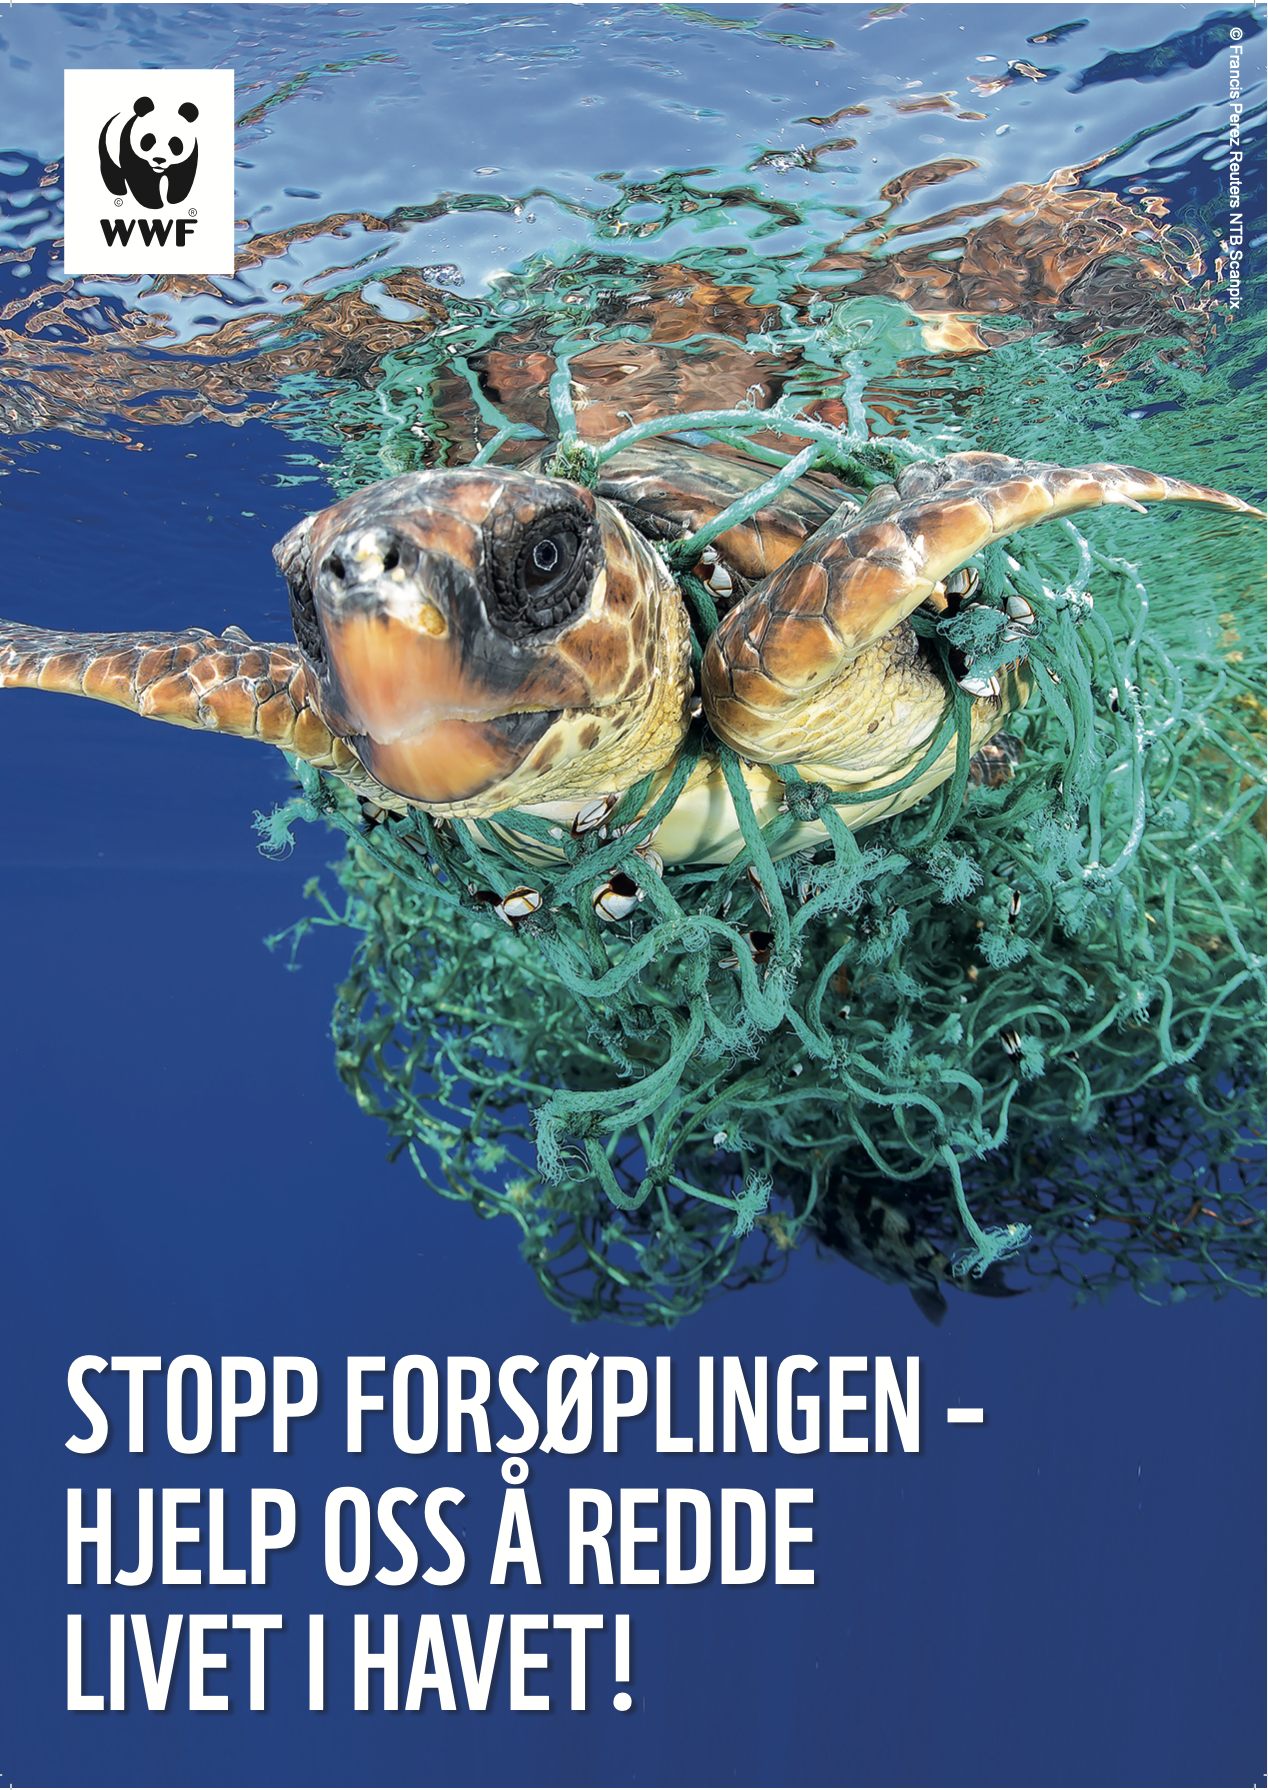 WWF Norway campaign poster. WWF Norway logo in the top left corner. Main image of a turtle trapped in green netting, swimming just below the surface of a clear blue sea. Stopp Forsoplingen - hjelp oss a redde livet I havet!